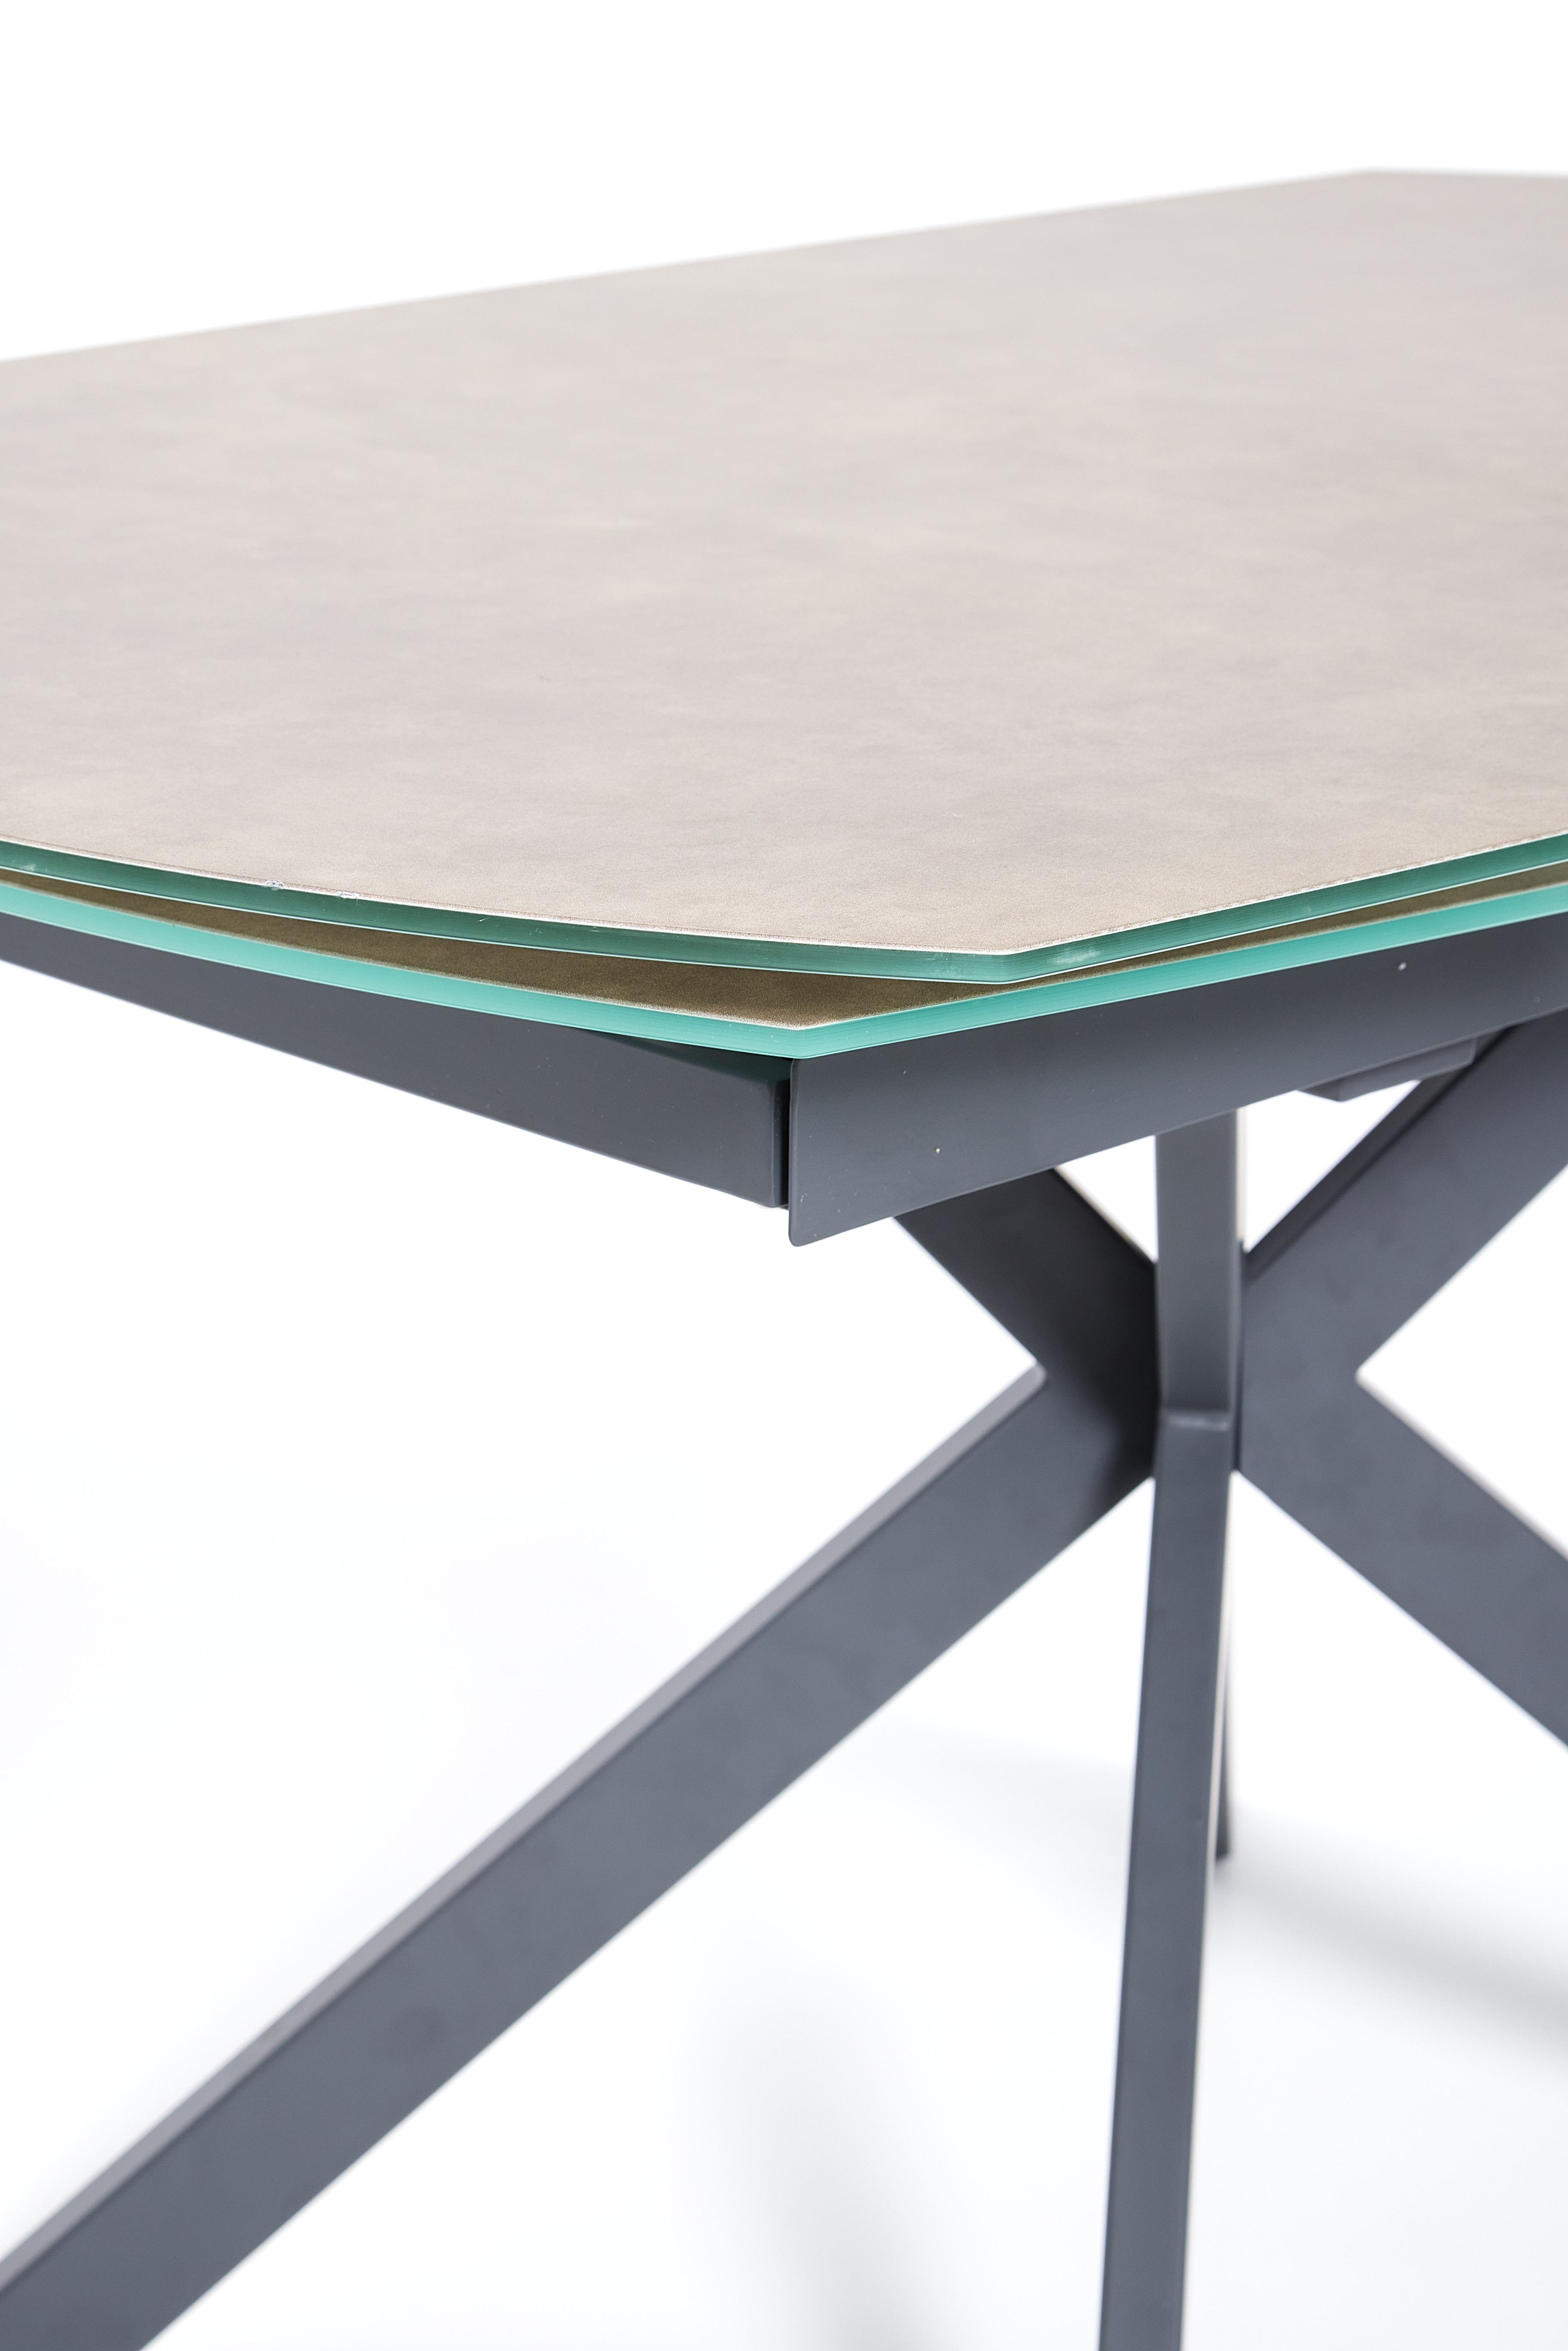 Tietro 140-200cm Extend Dining Table and 4 Teal Carter Dining Chairs - Bundle Deal